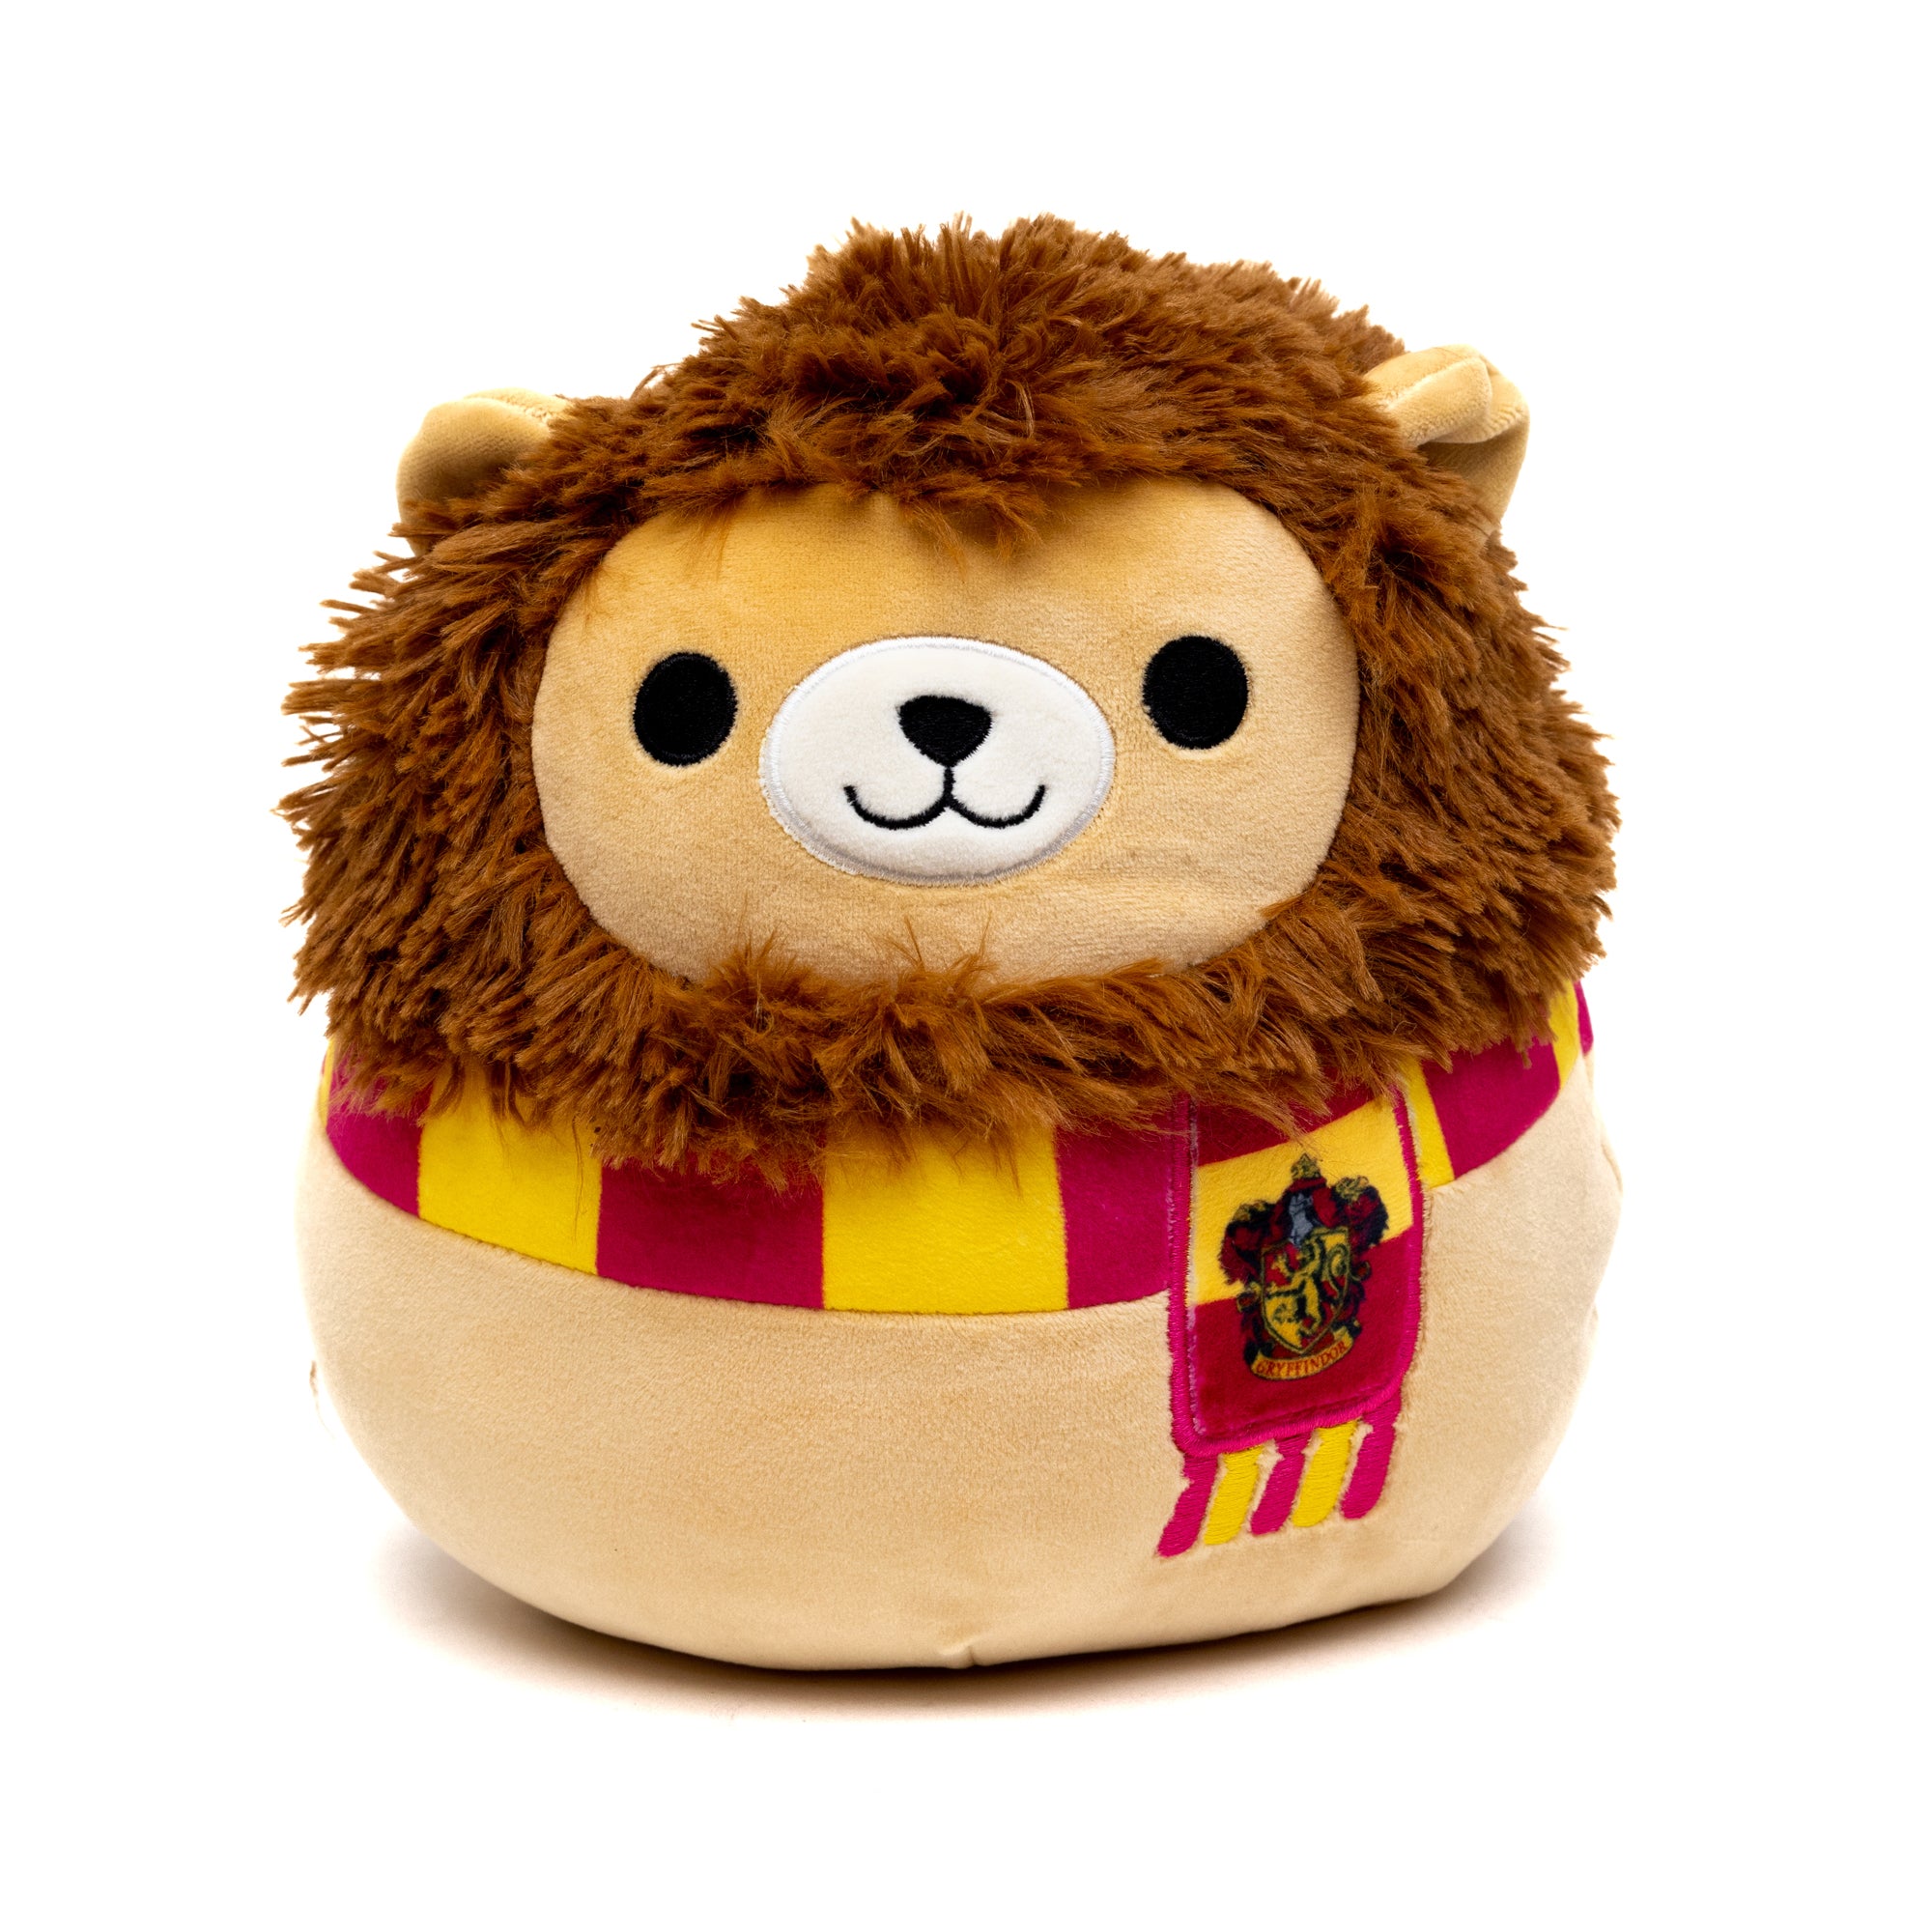 Squishmallows, Toys, Nwt Harry Potter Squishmallow 4 Houses Gryffindor  Ravenclaw Hufflepuff Slytherin